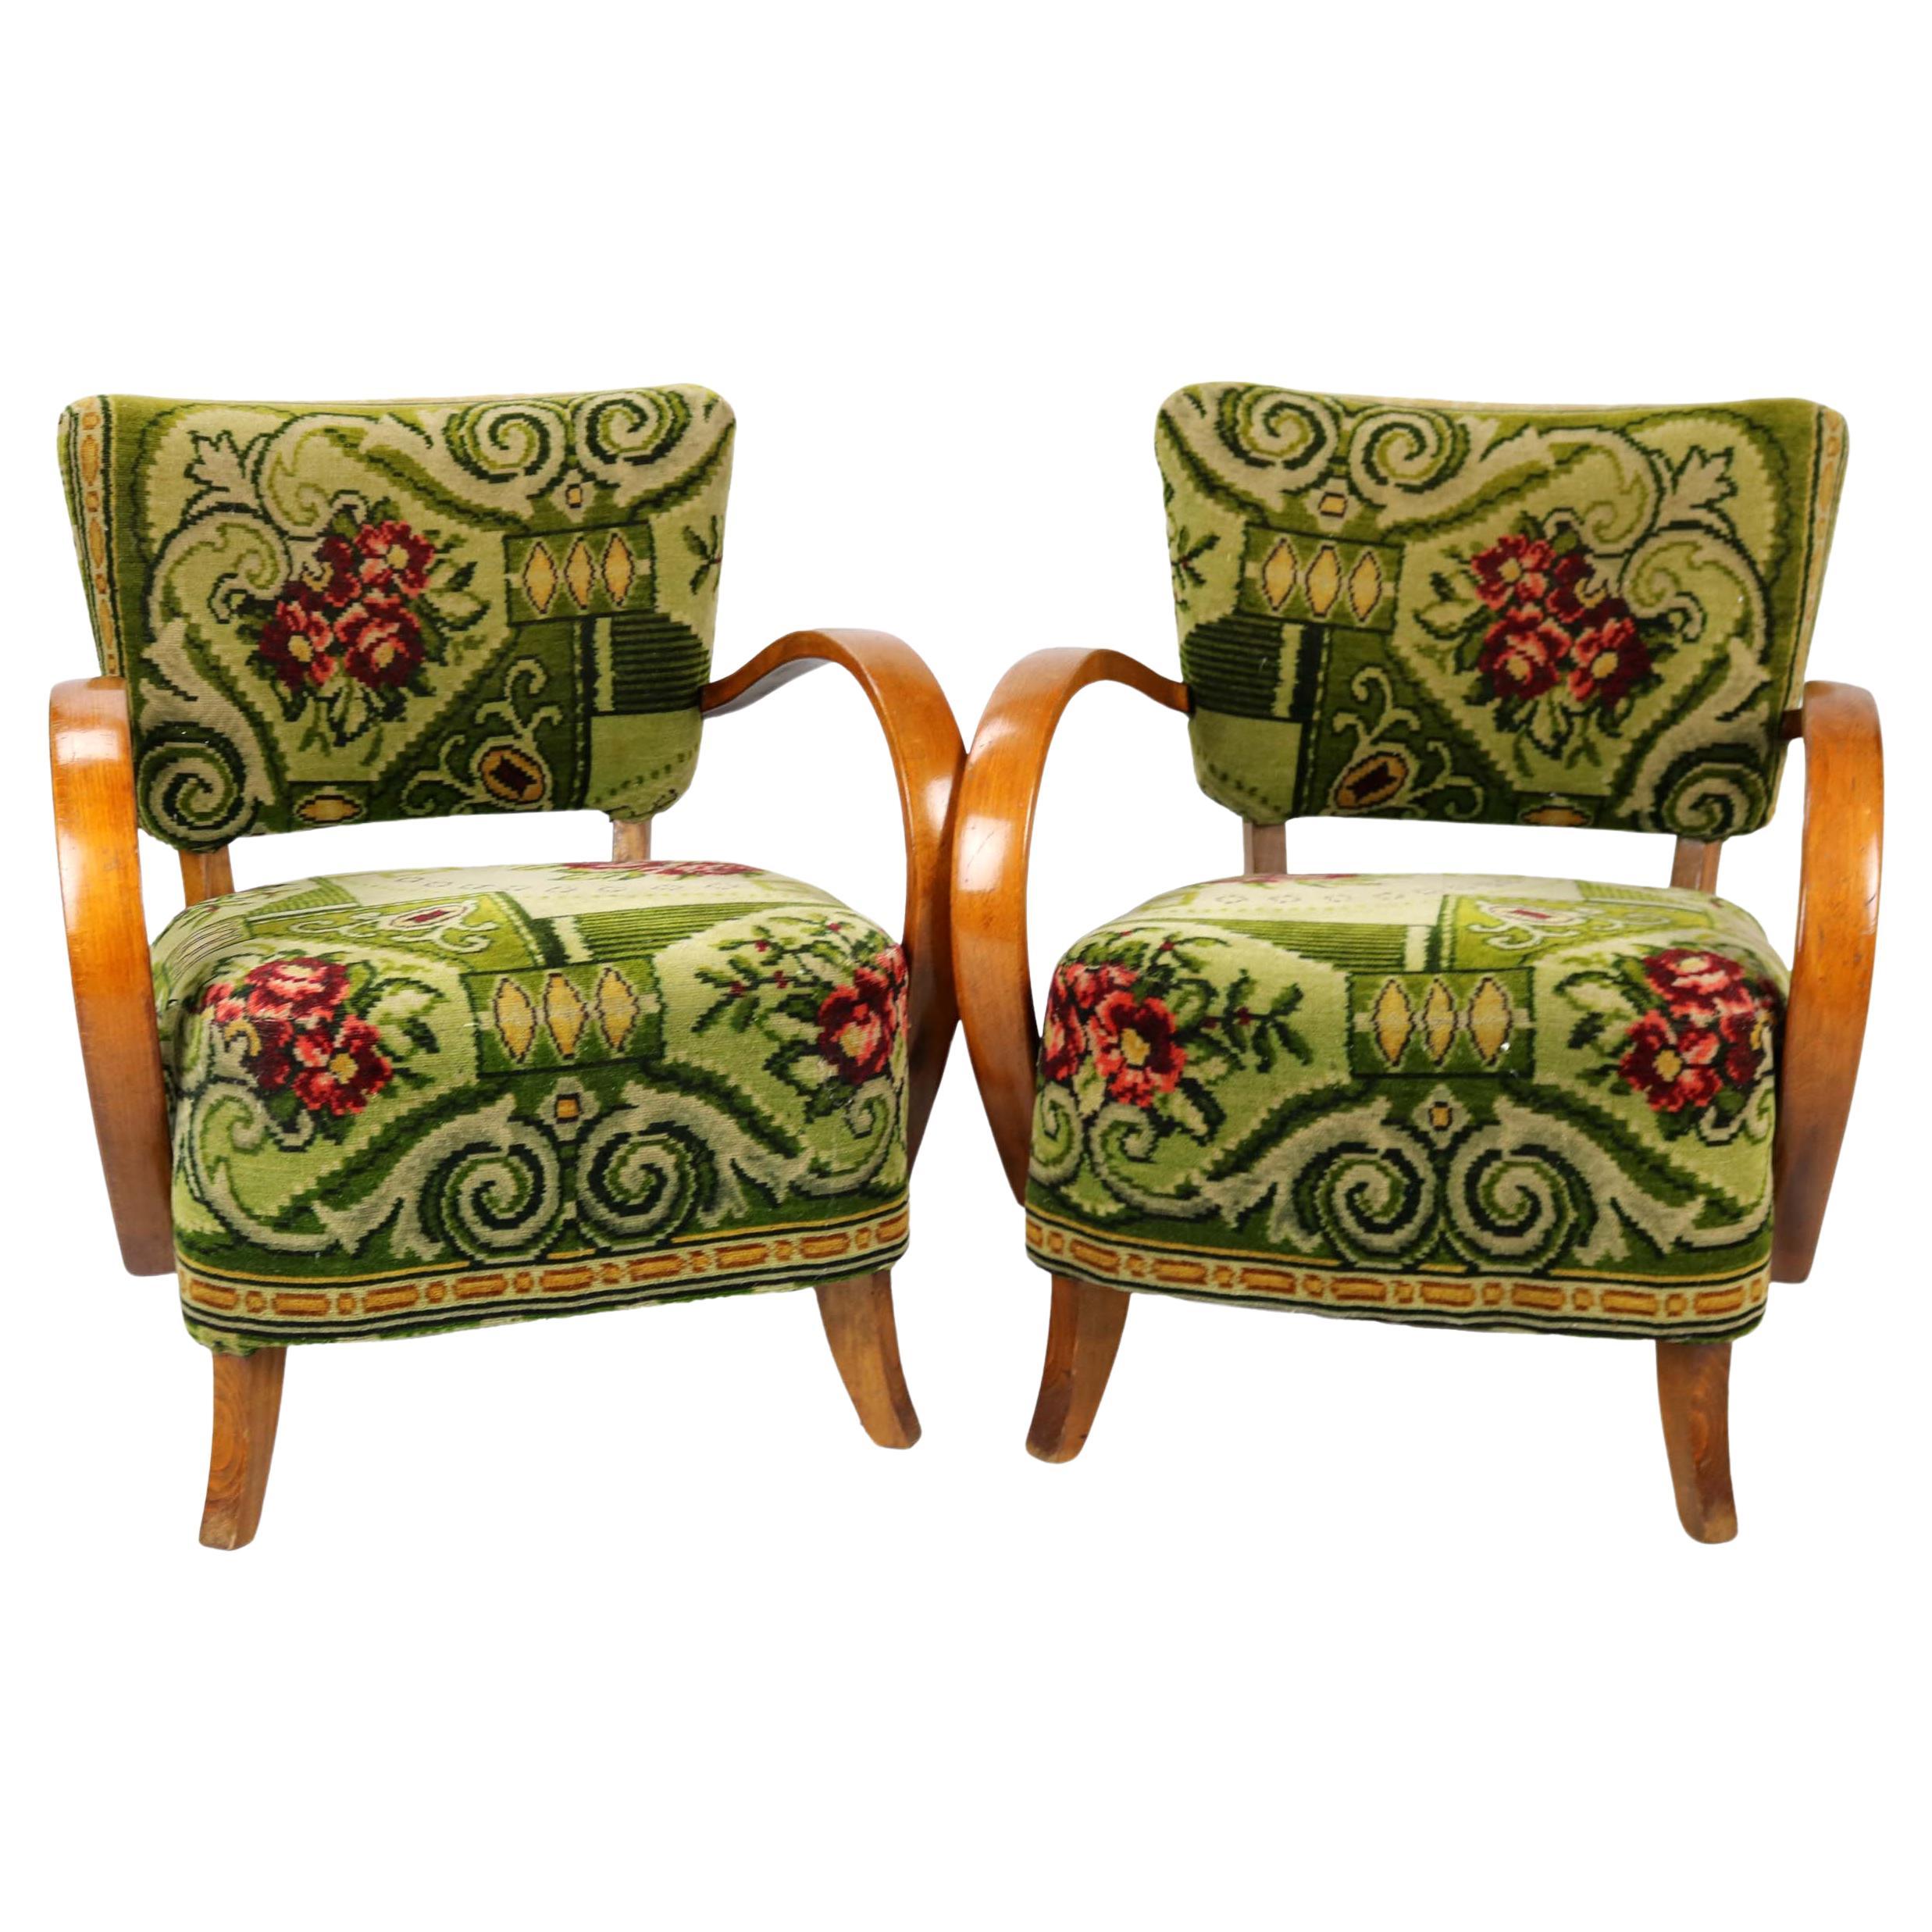 This beautiful set of floral patterned Art Deco armchairs will uplift any libing room or conservatory with its beauty and craftsmanship. The armchairs were designed by the reknowned Czech designer Jindrich Halabala. The armchairs are not only